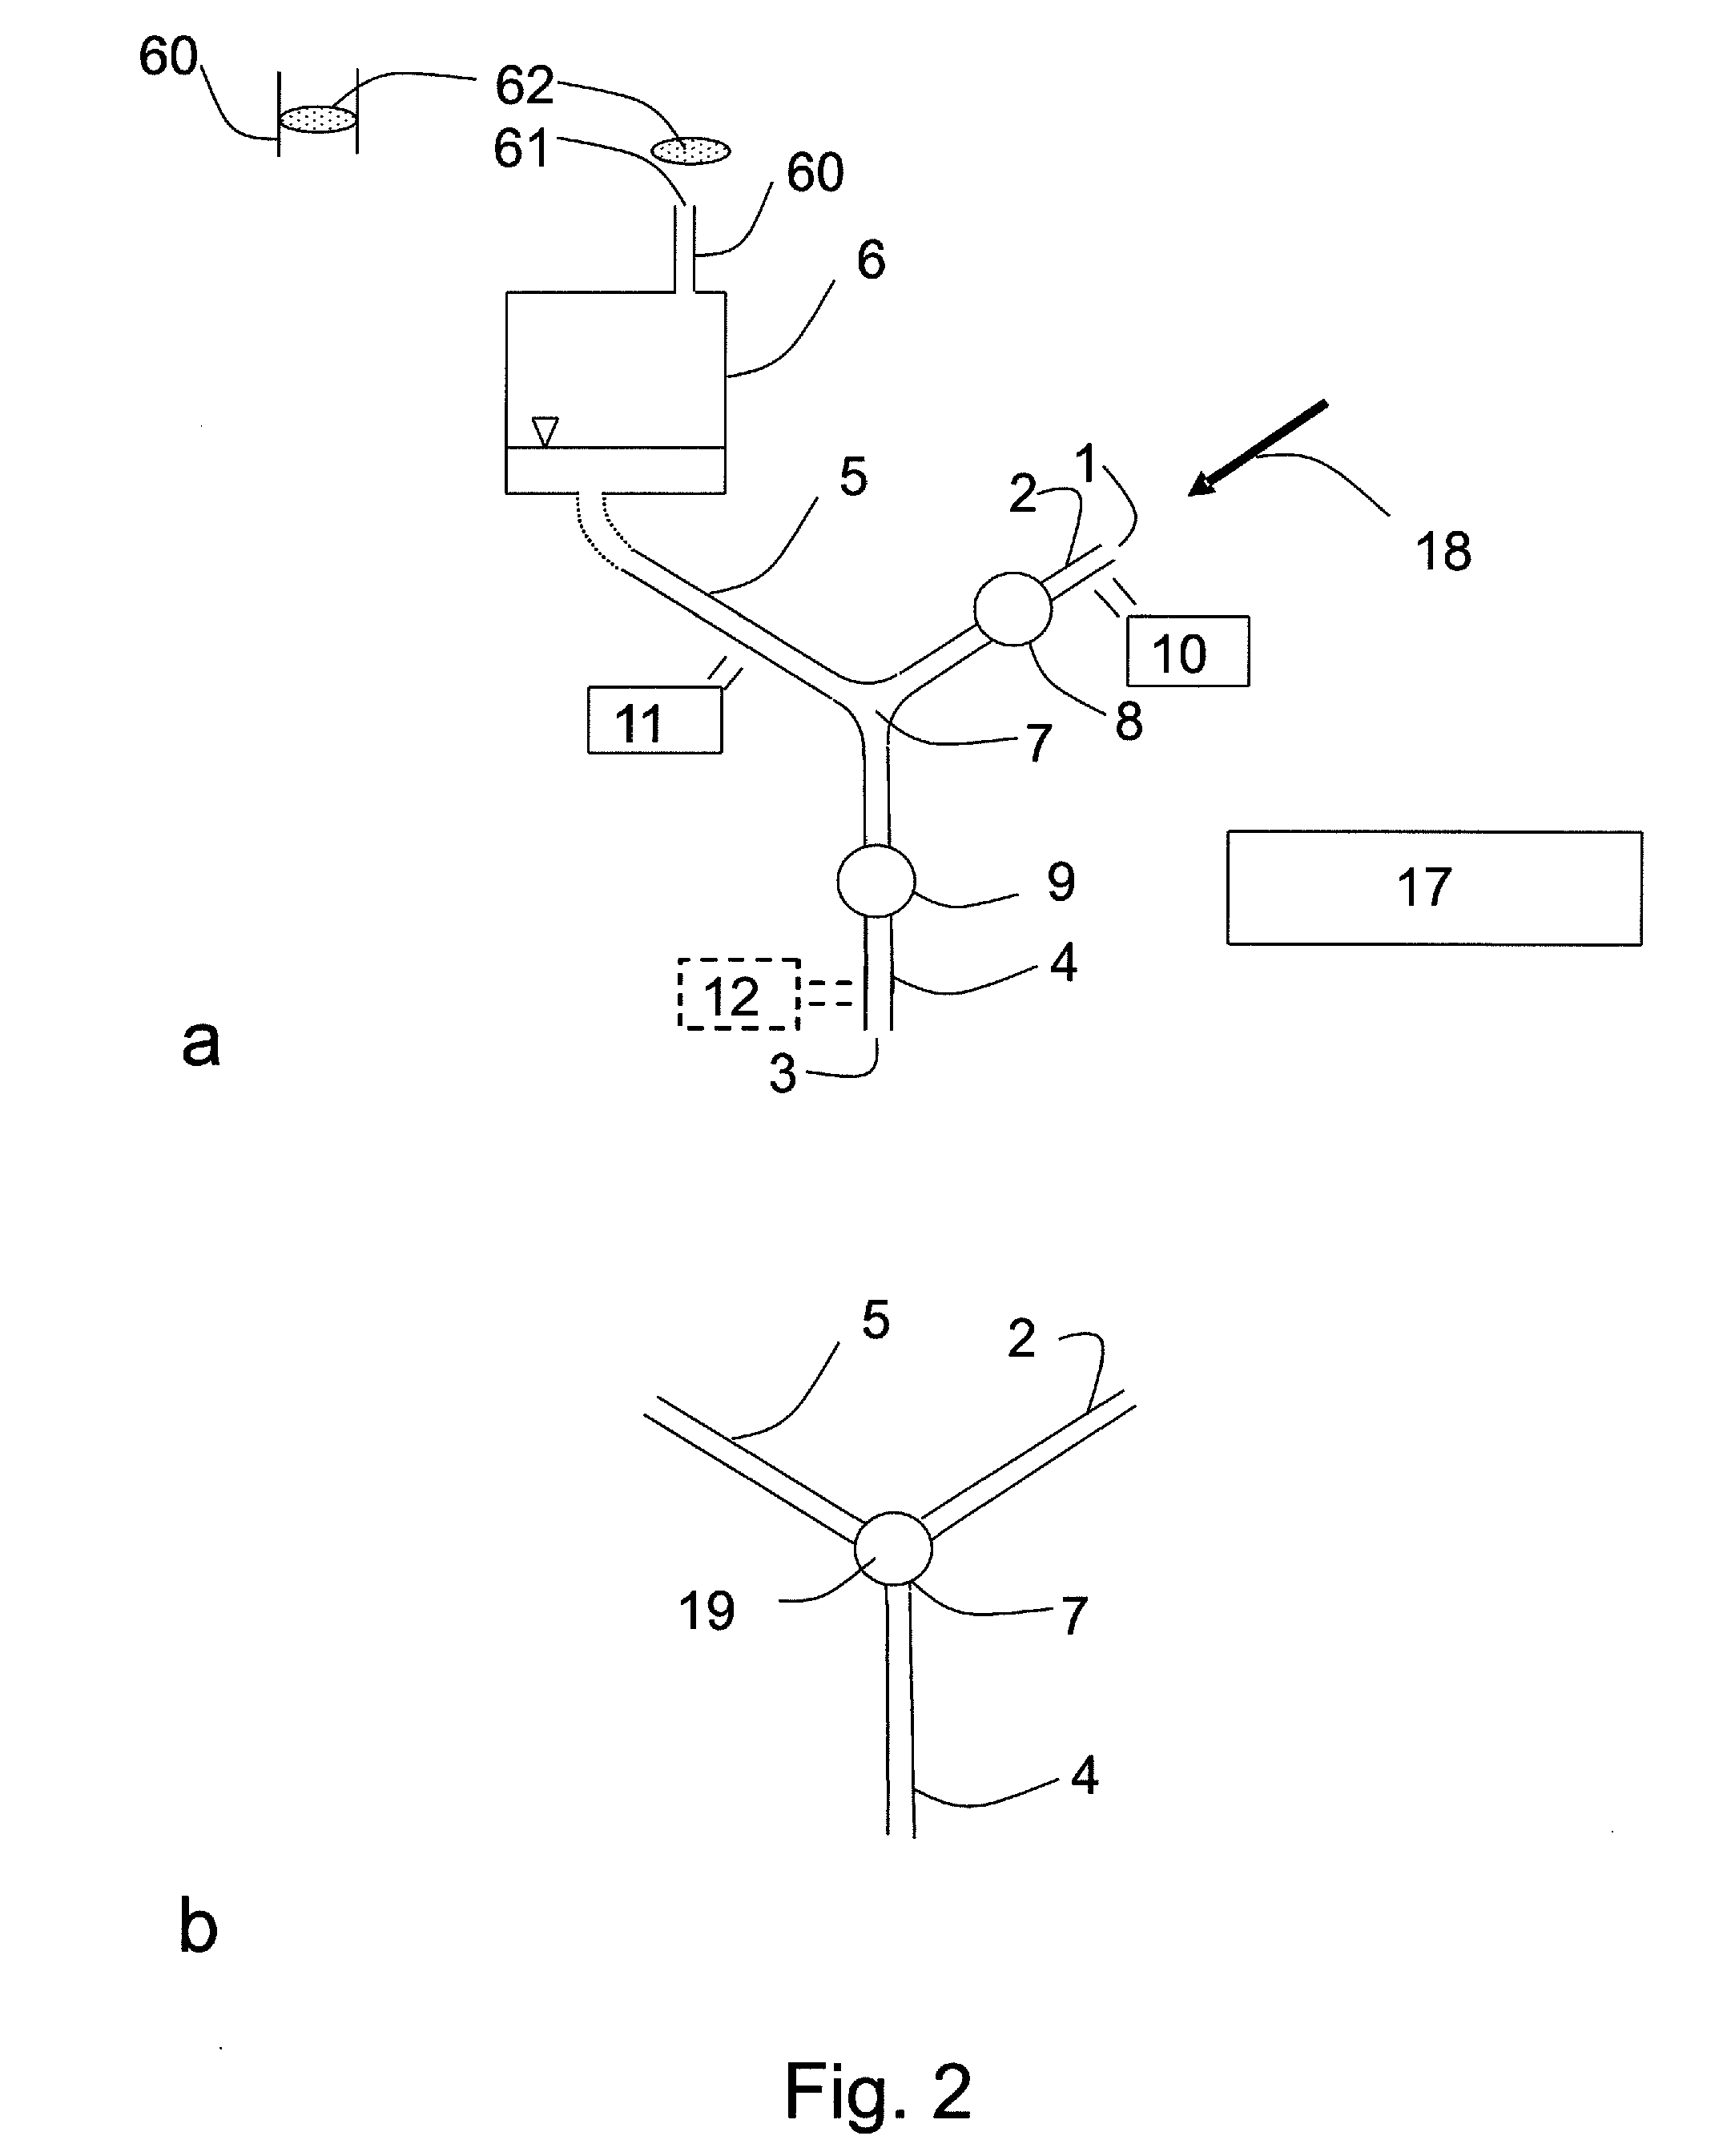 Fluidics-based orientation and sorting device for plant embryos